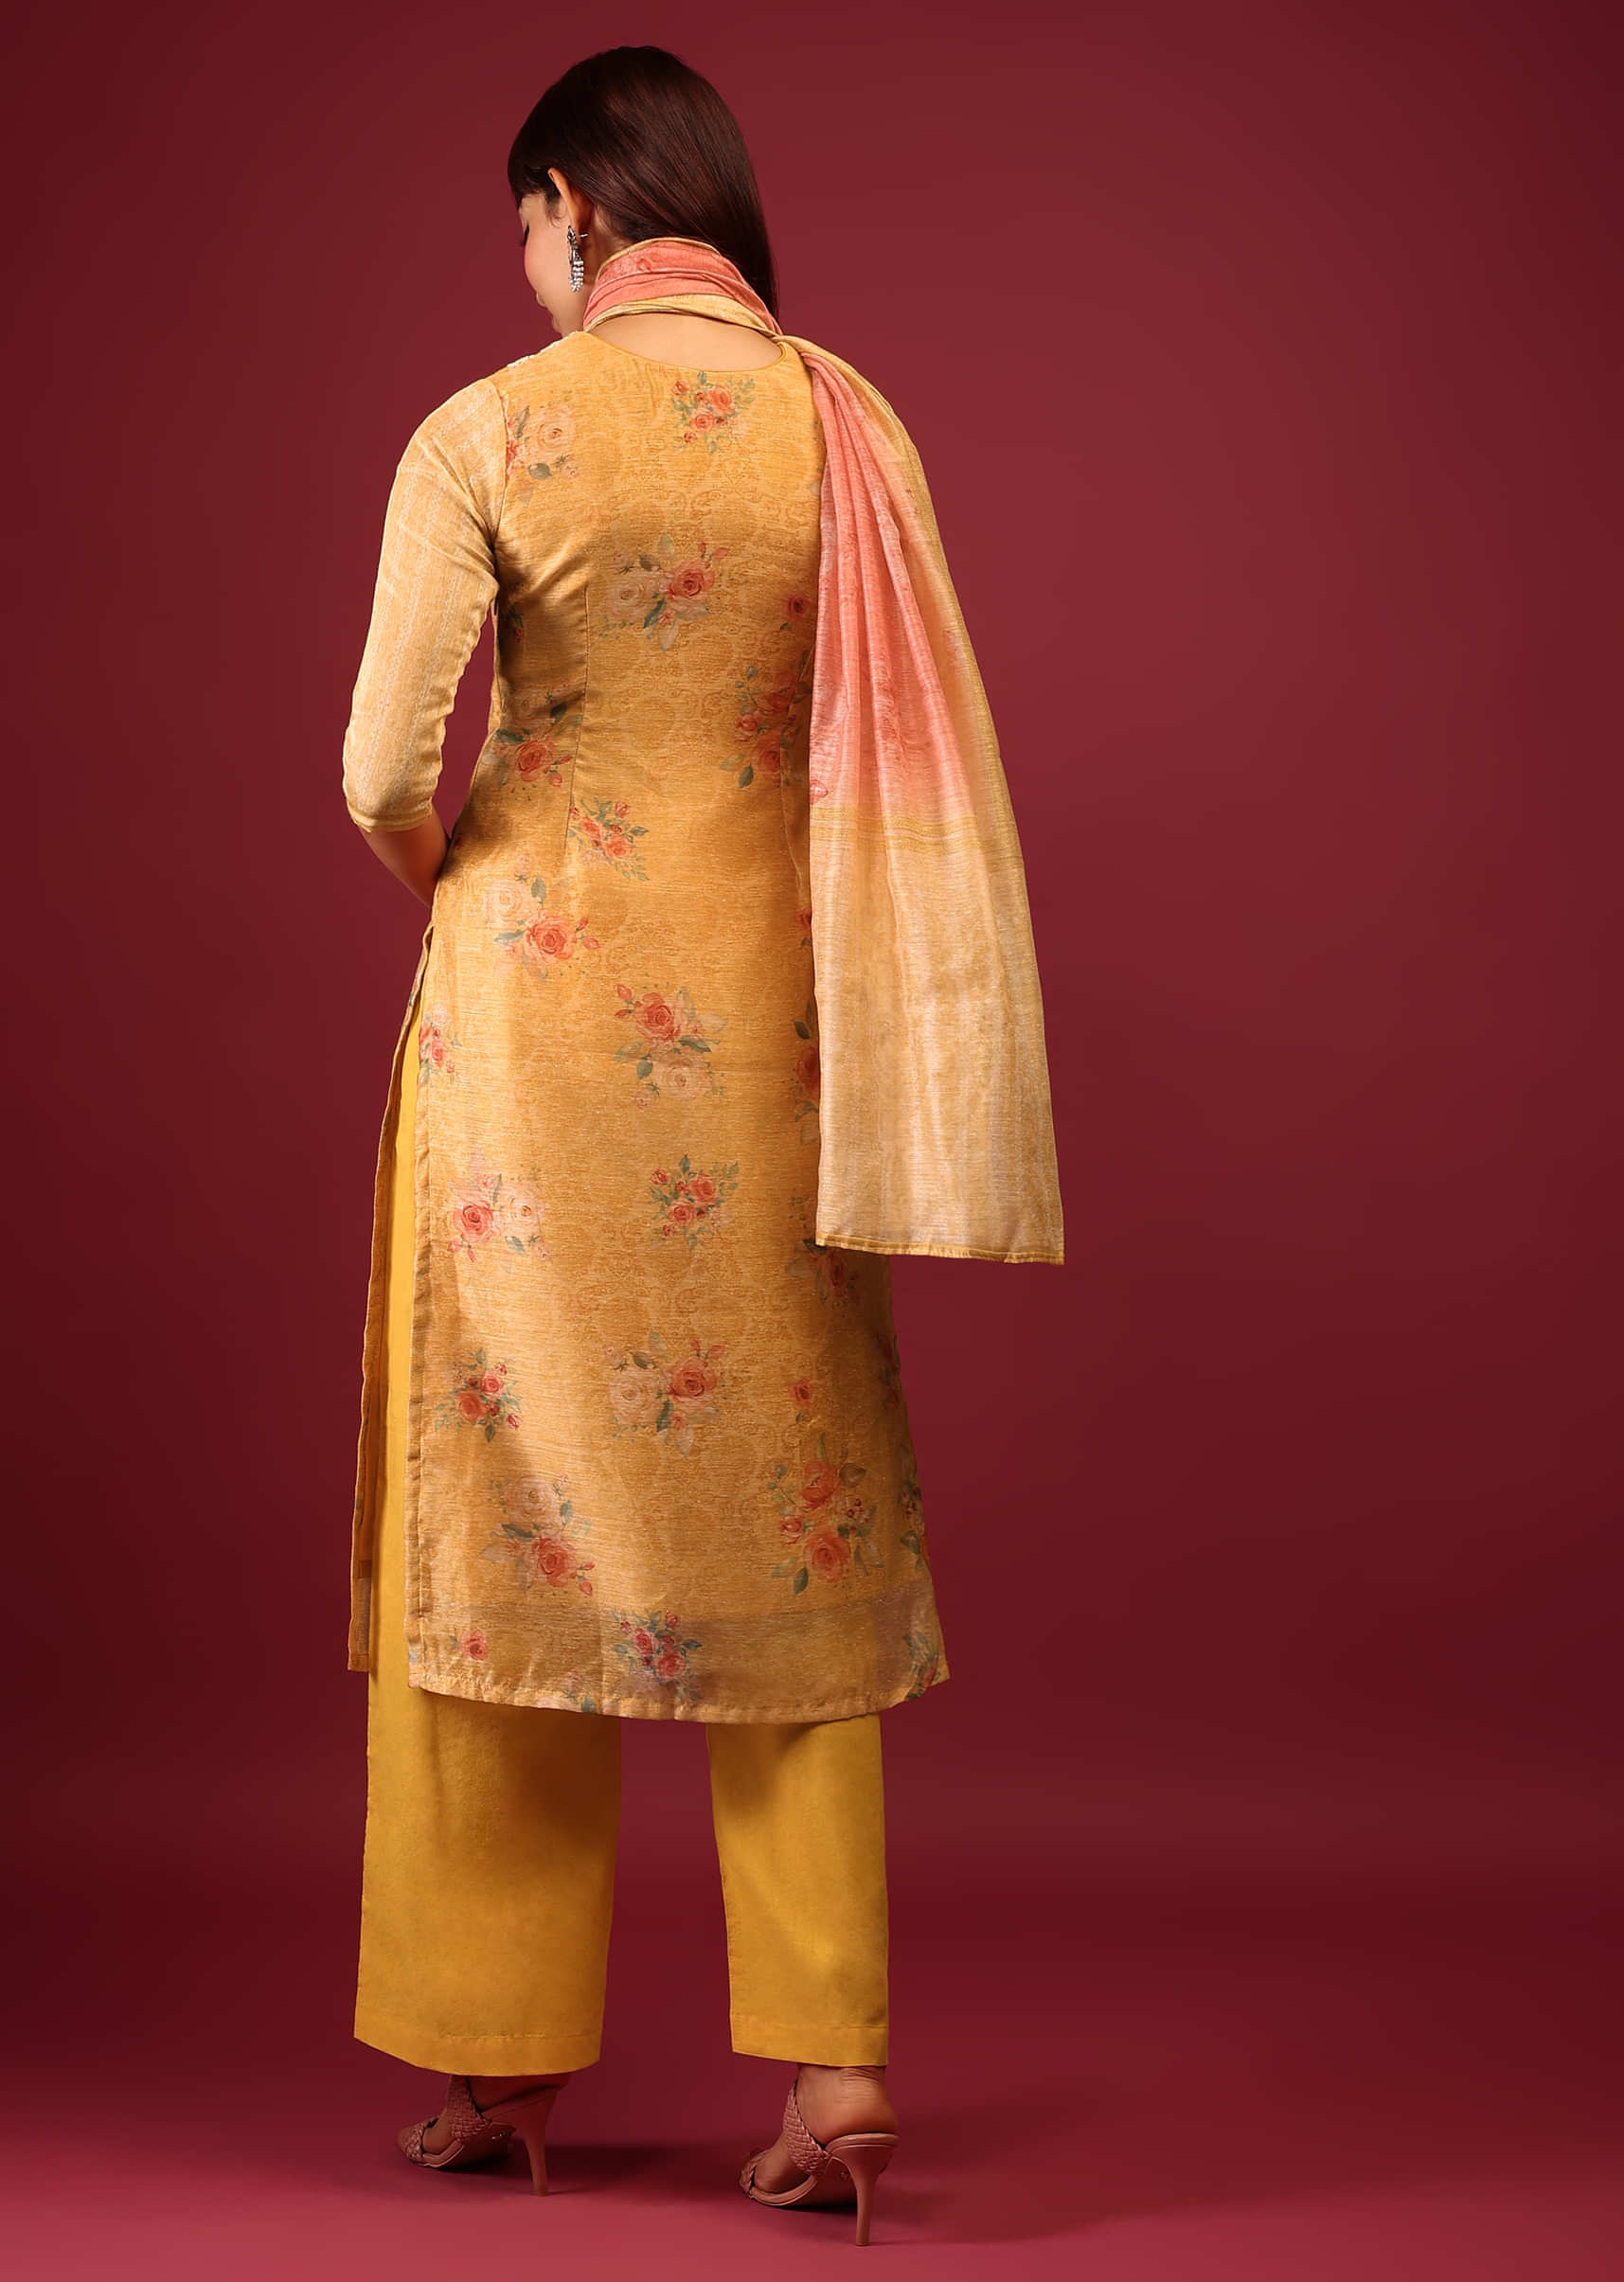 Mustard Yellow Floral Print Palazzo Suit In U Neckline With Thread And Zari Embroidery